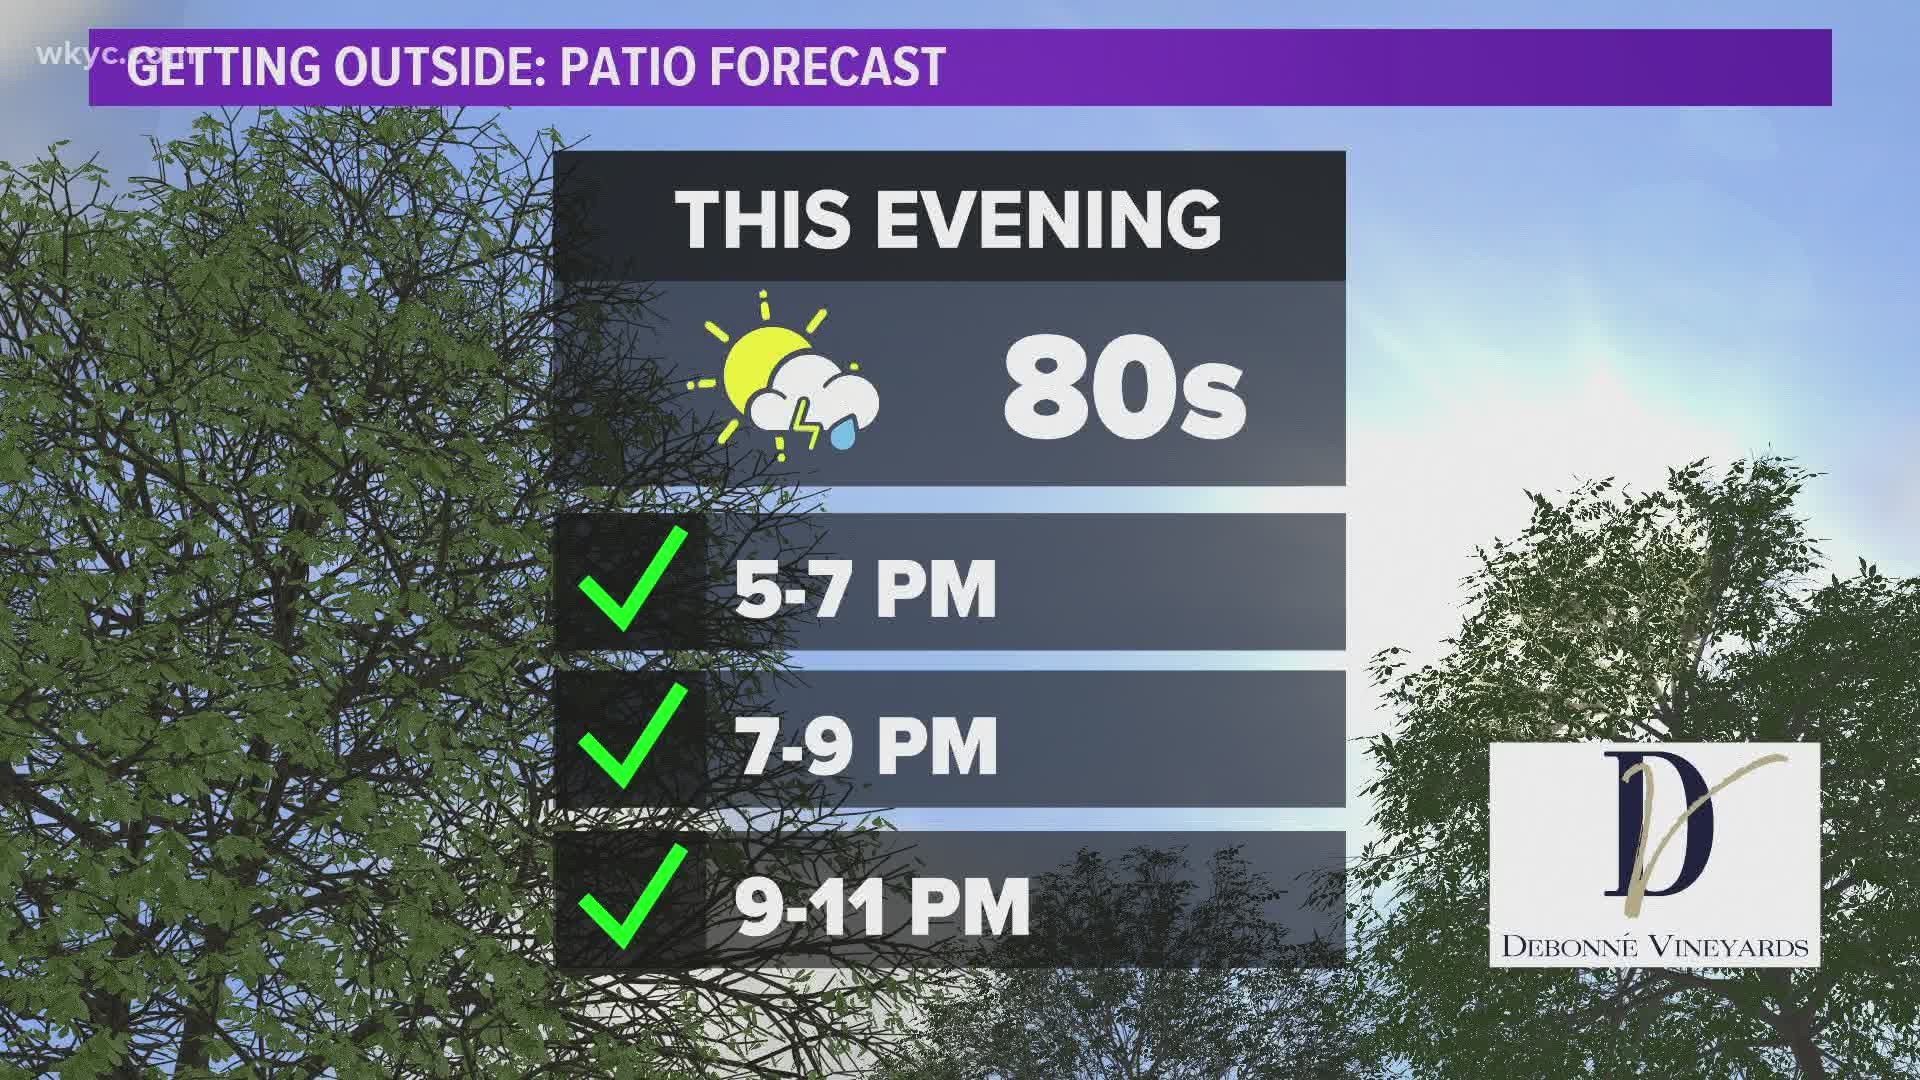 For tonight, look for a slight chance of a shower then partly cloudy by morning with a low of 64. Tomorrow, mostly sunny and pleasant and a high of 78.